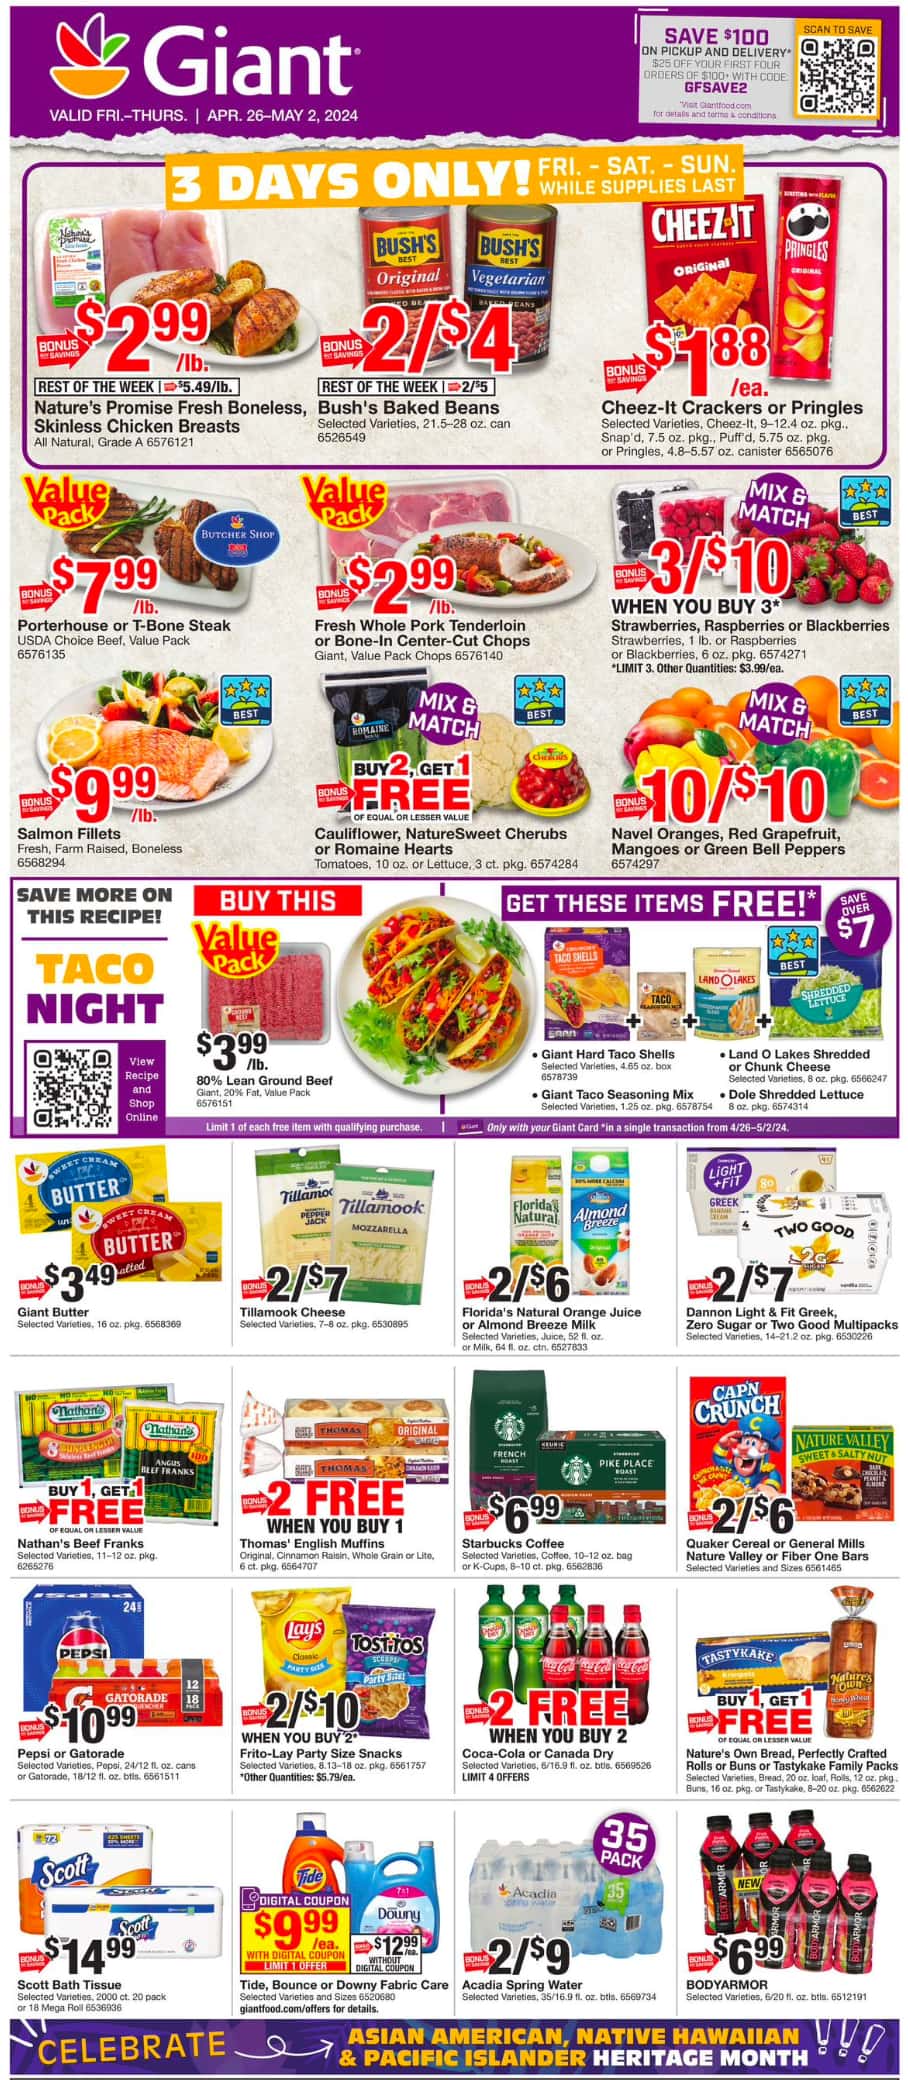 Giant_weekly_ad_042624_01